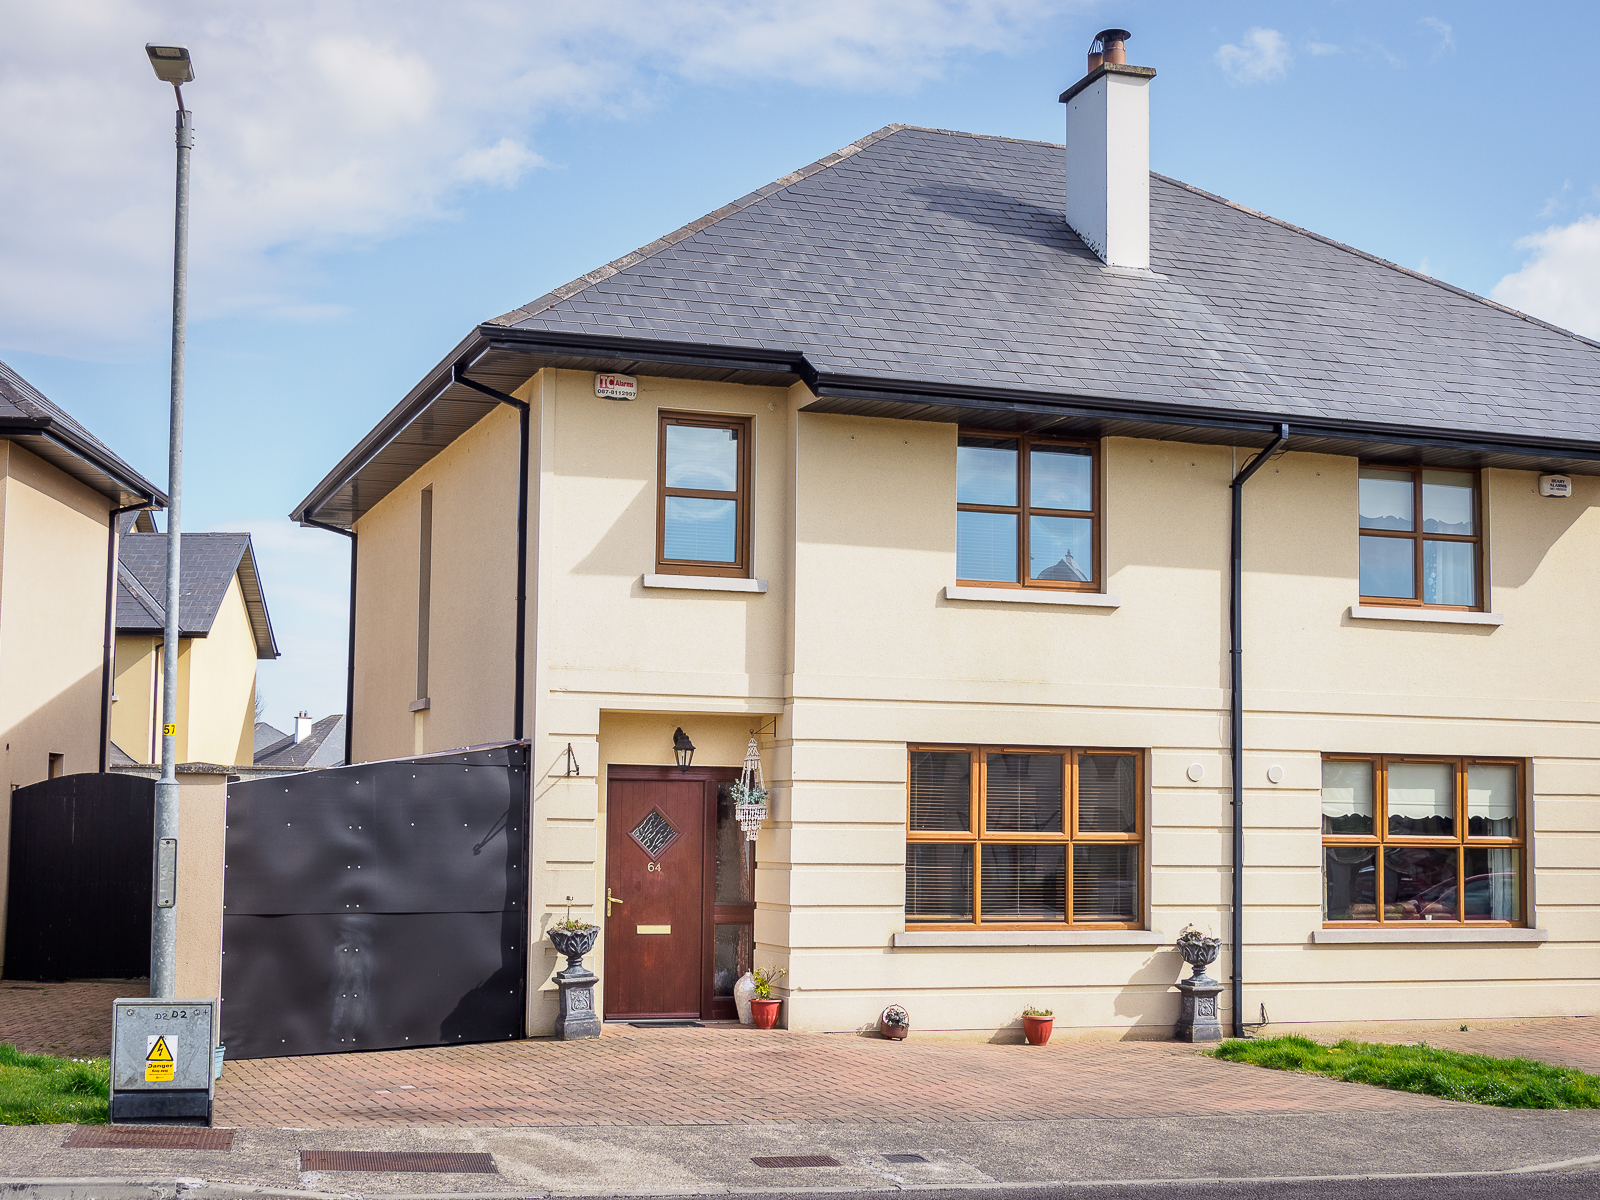 64 Springfield Grove, Rossmore Village, Tipperary Town, Co. Tipperary